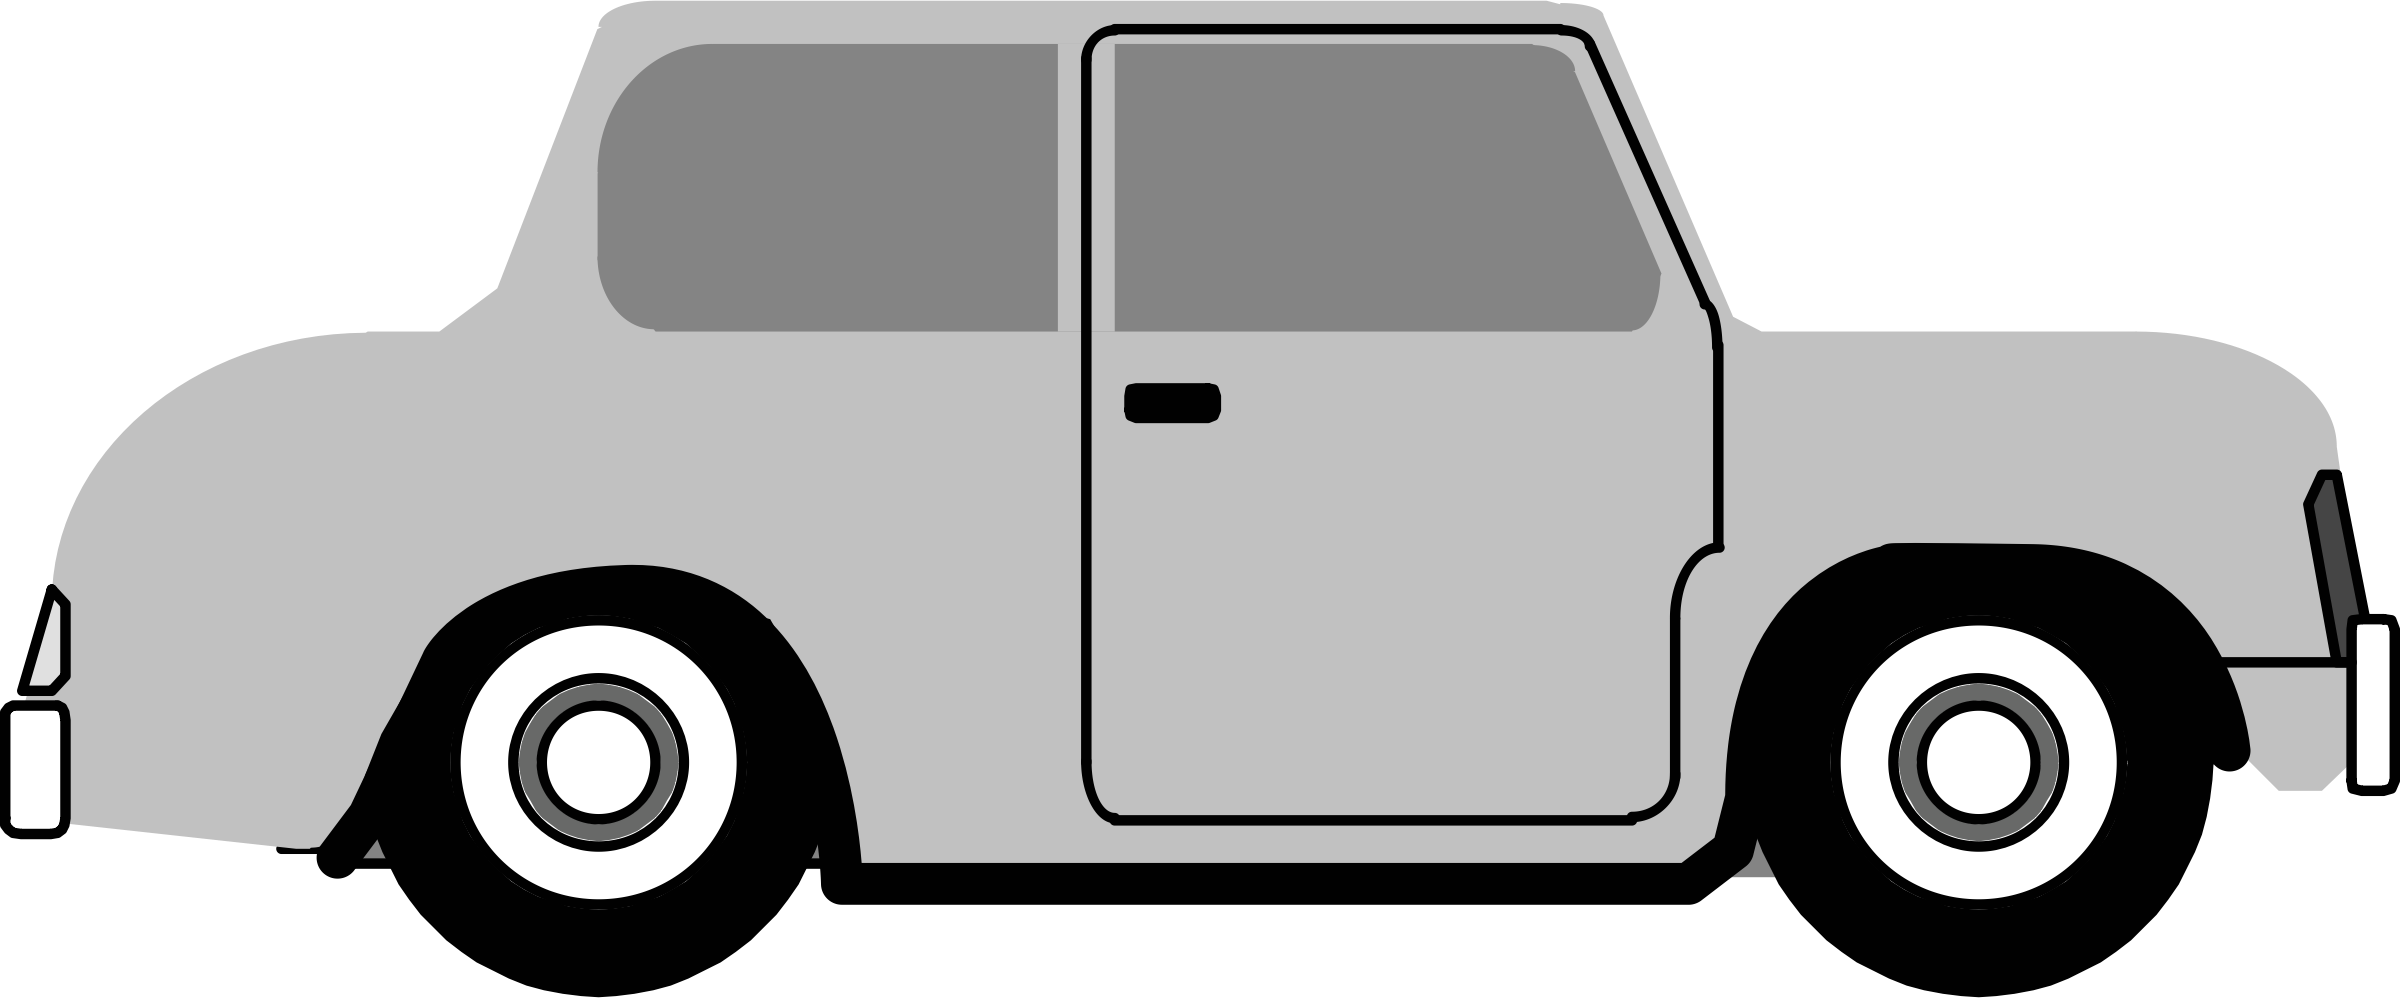 Clipart - car side view